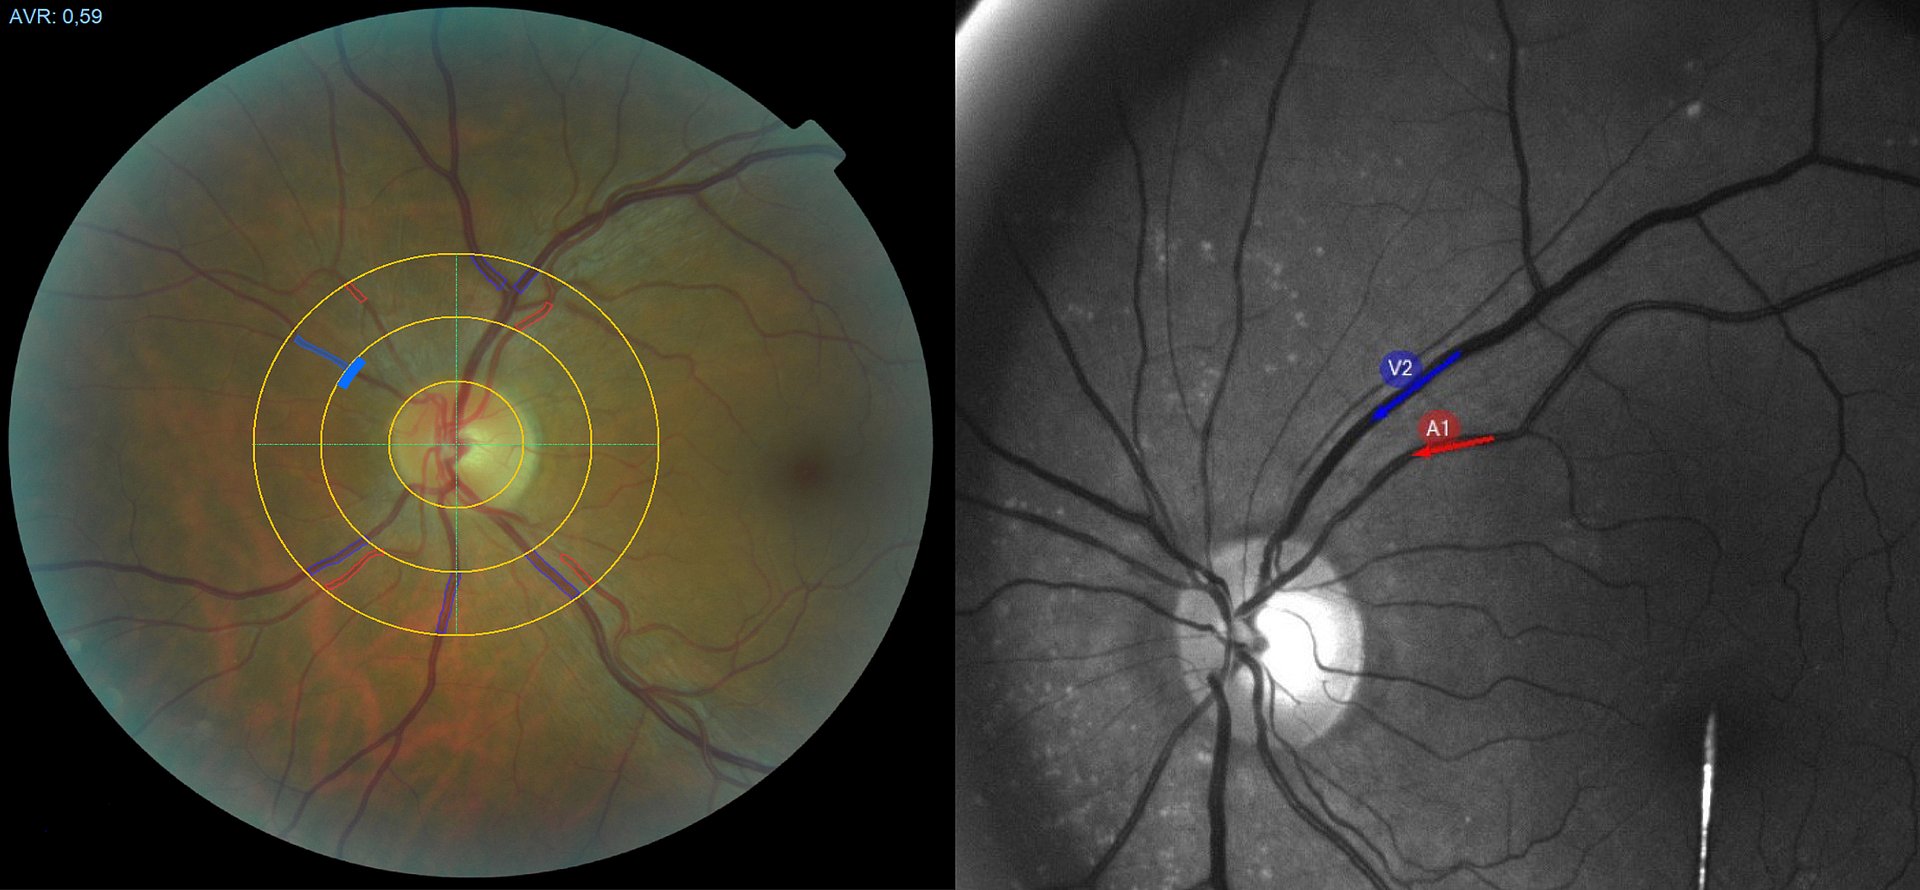 Two images from eye examinations